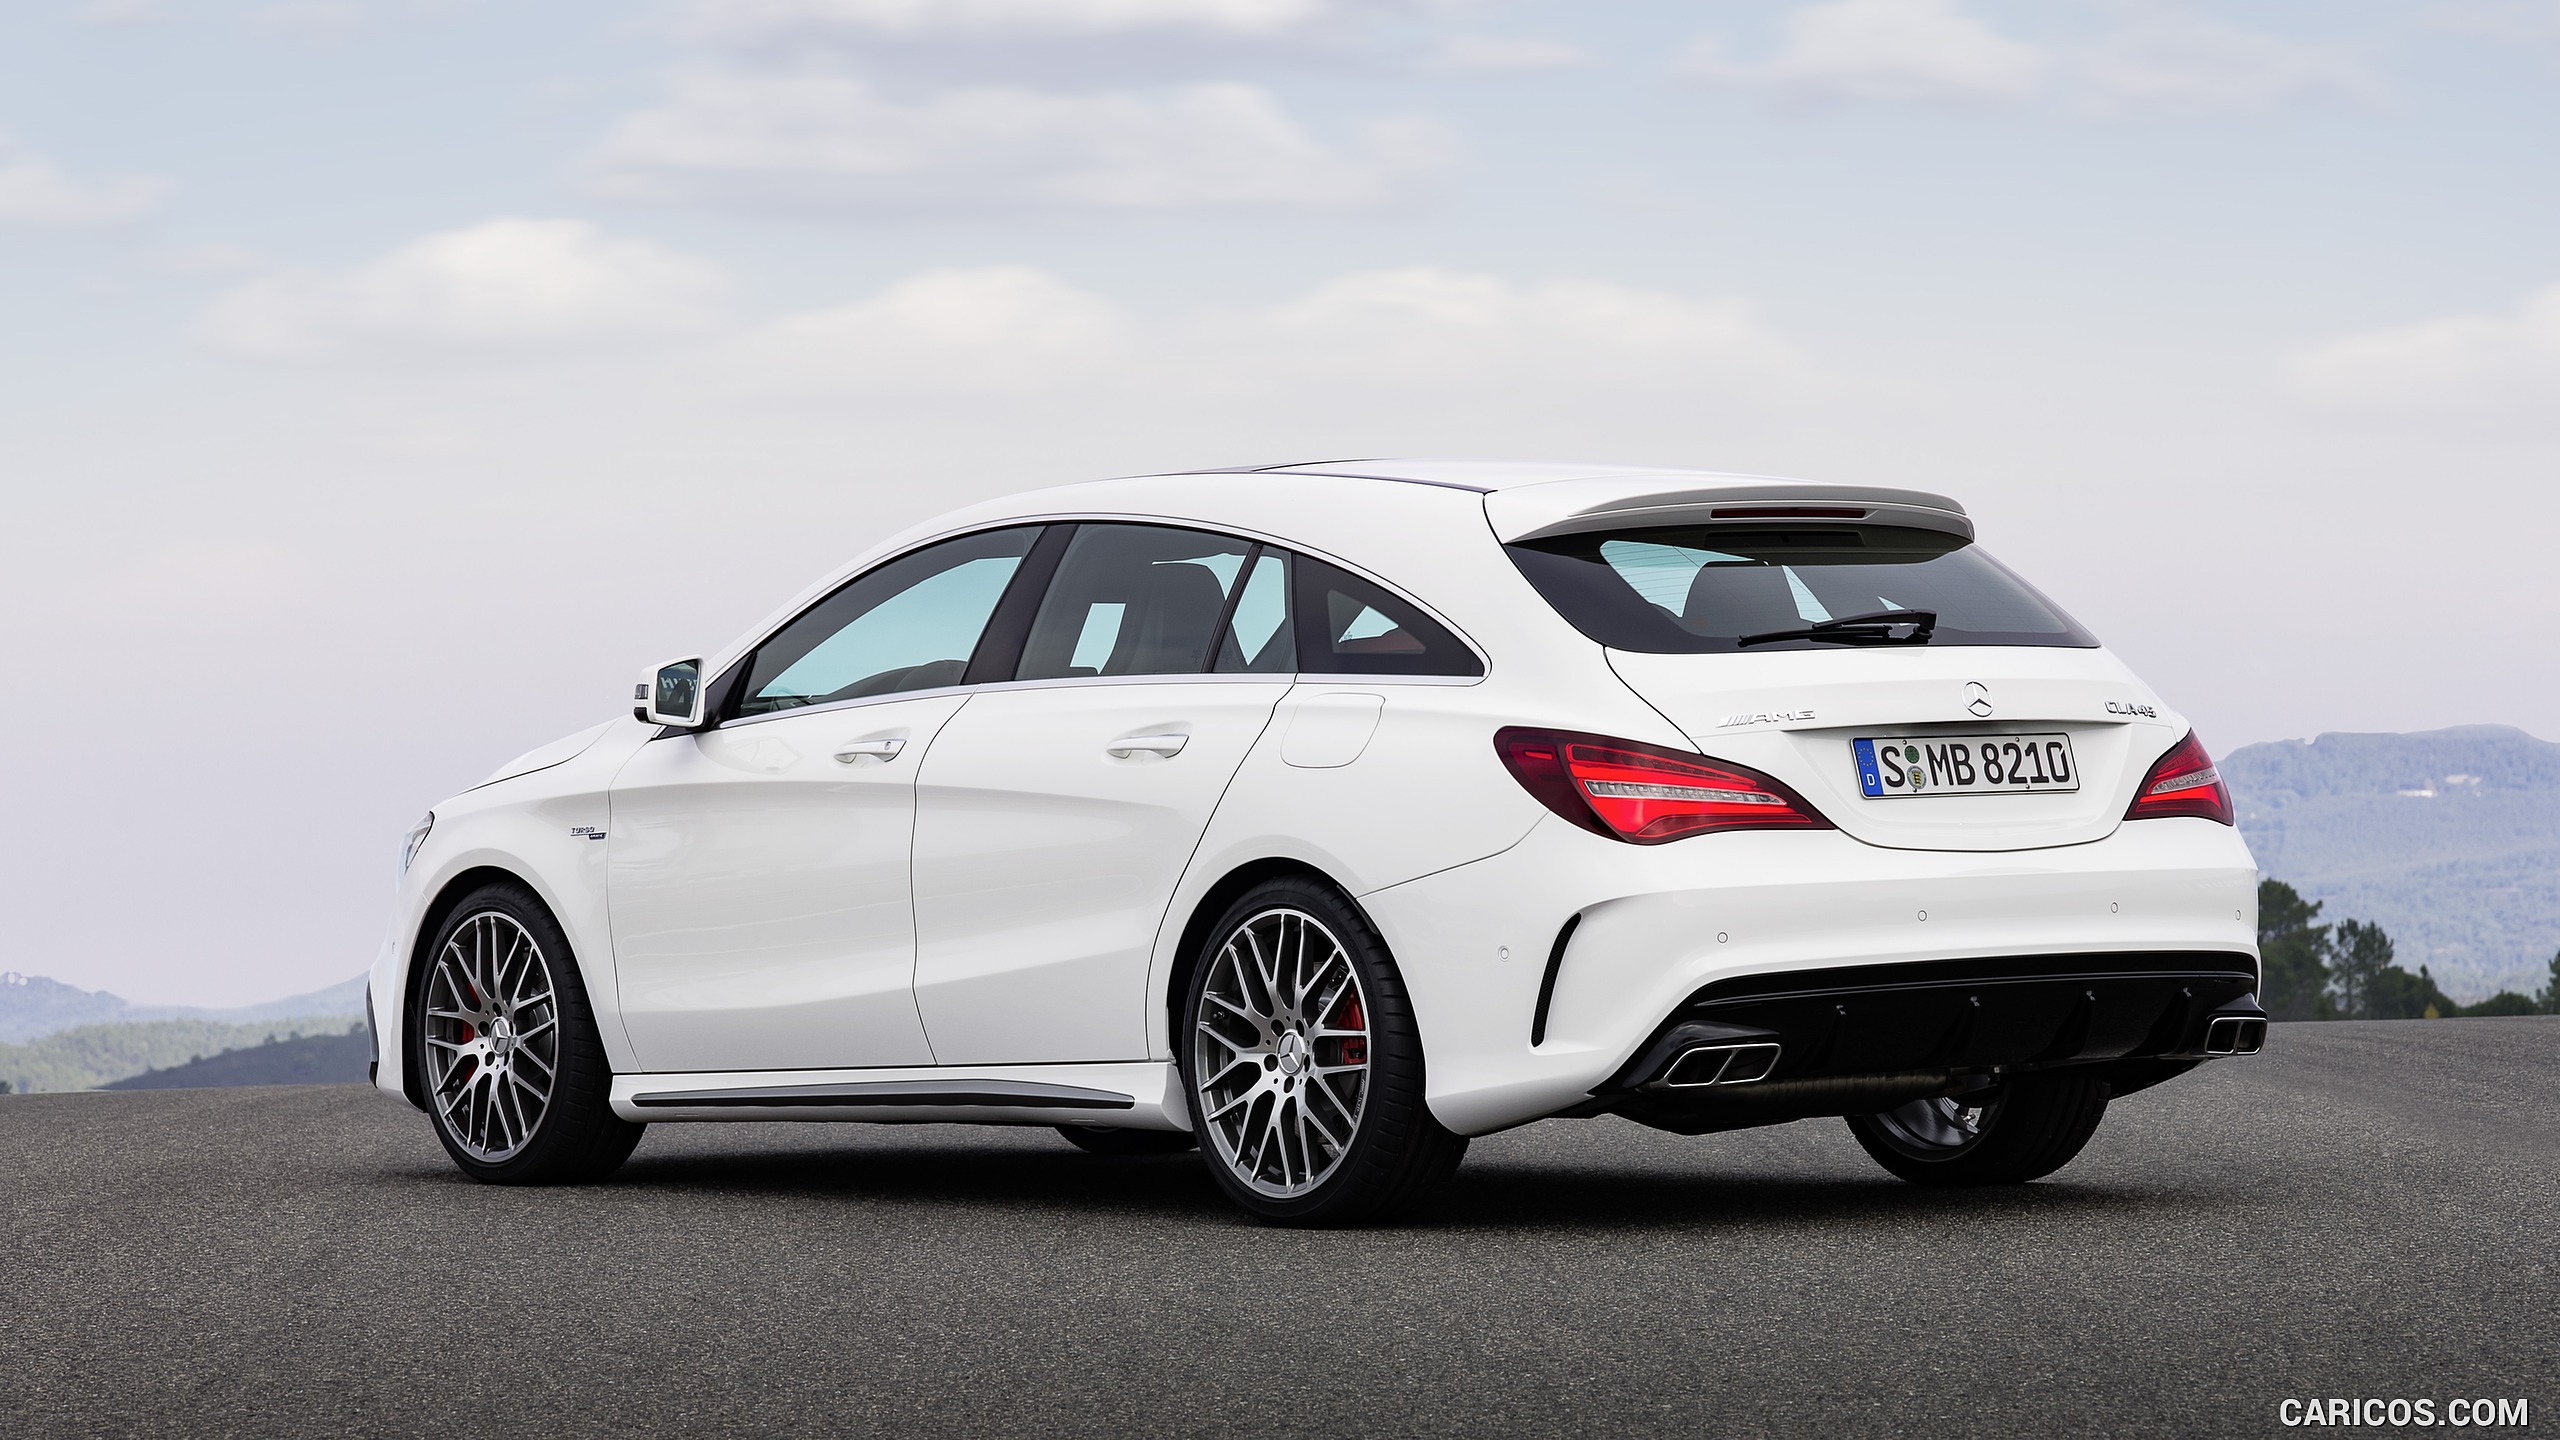 2017 Mercedes-AMG CLA 45 Shooting Brake (Chassis: X117, Color: Diamond White) - Rear, #7 of 48